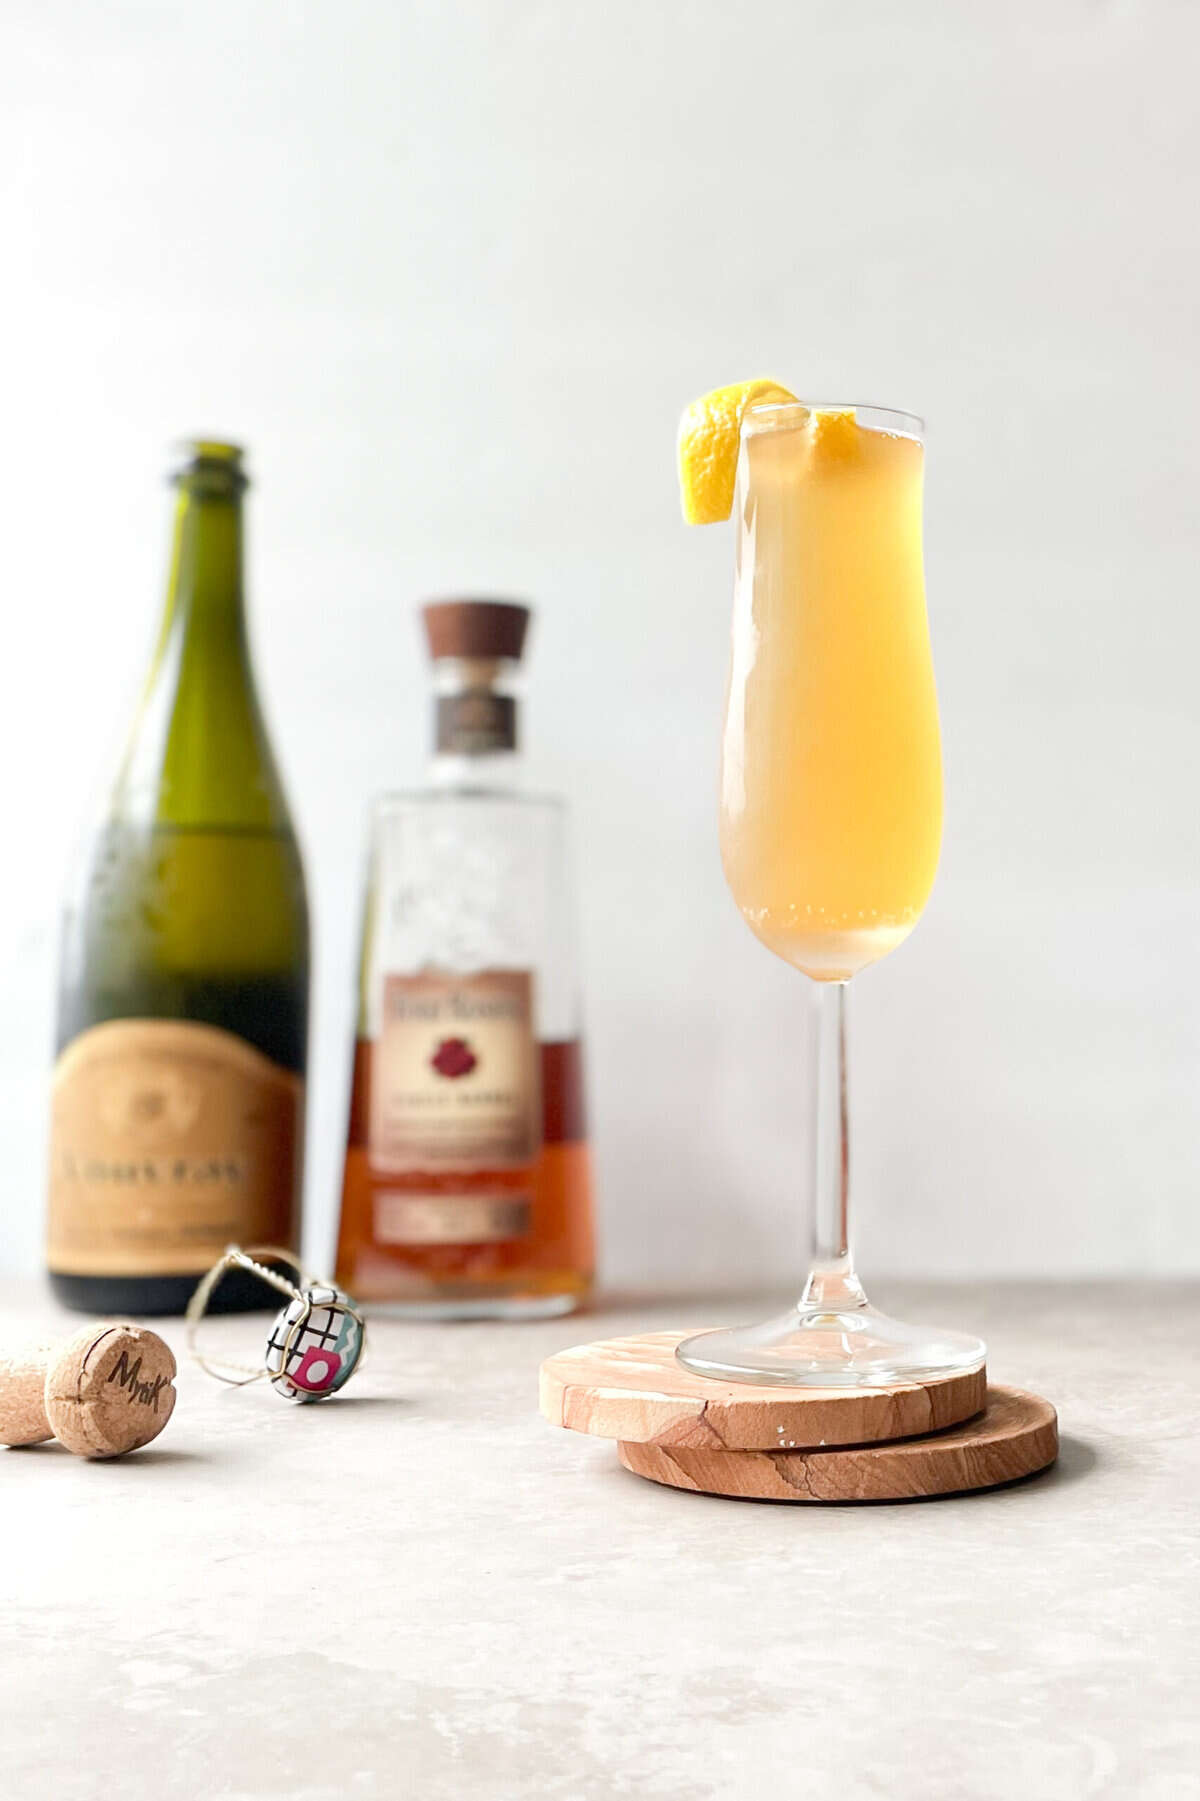 orange cocktail and lemon twist garnish on a champagne flute on two coasters with champagne and whiskey bottle in background.